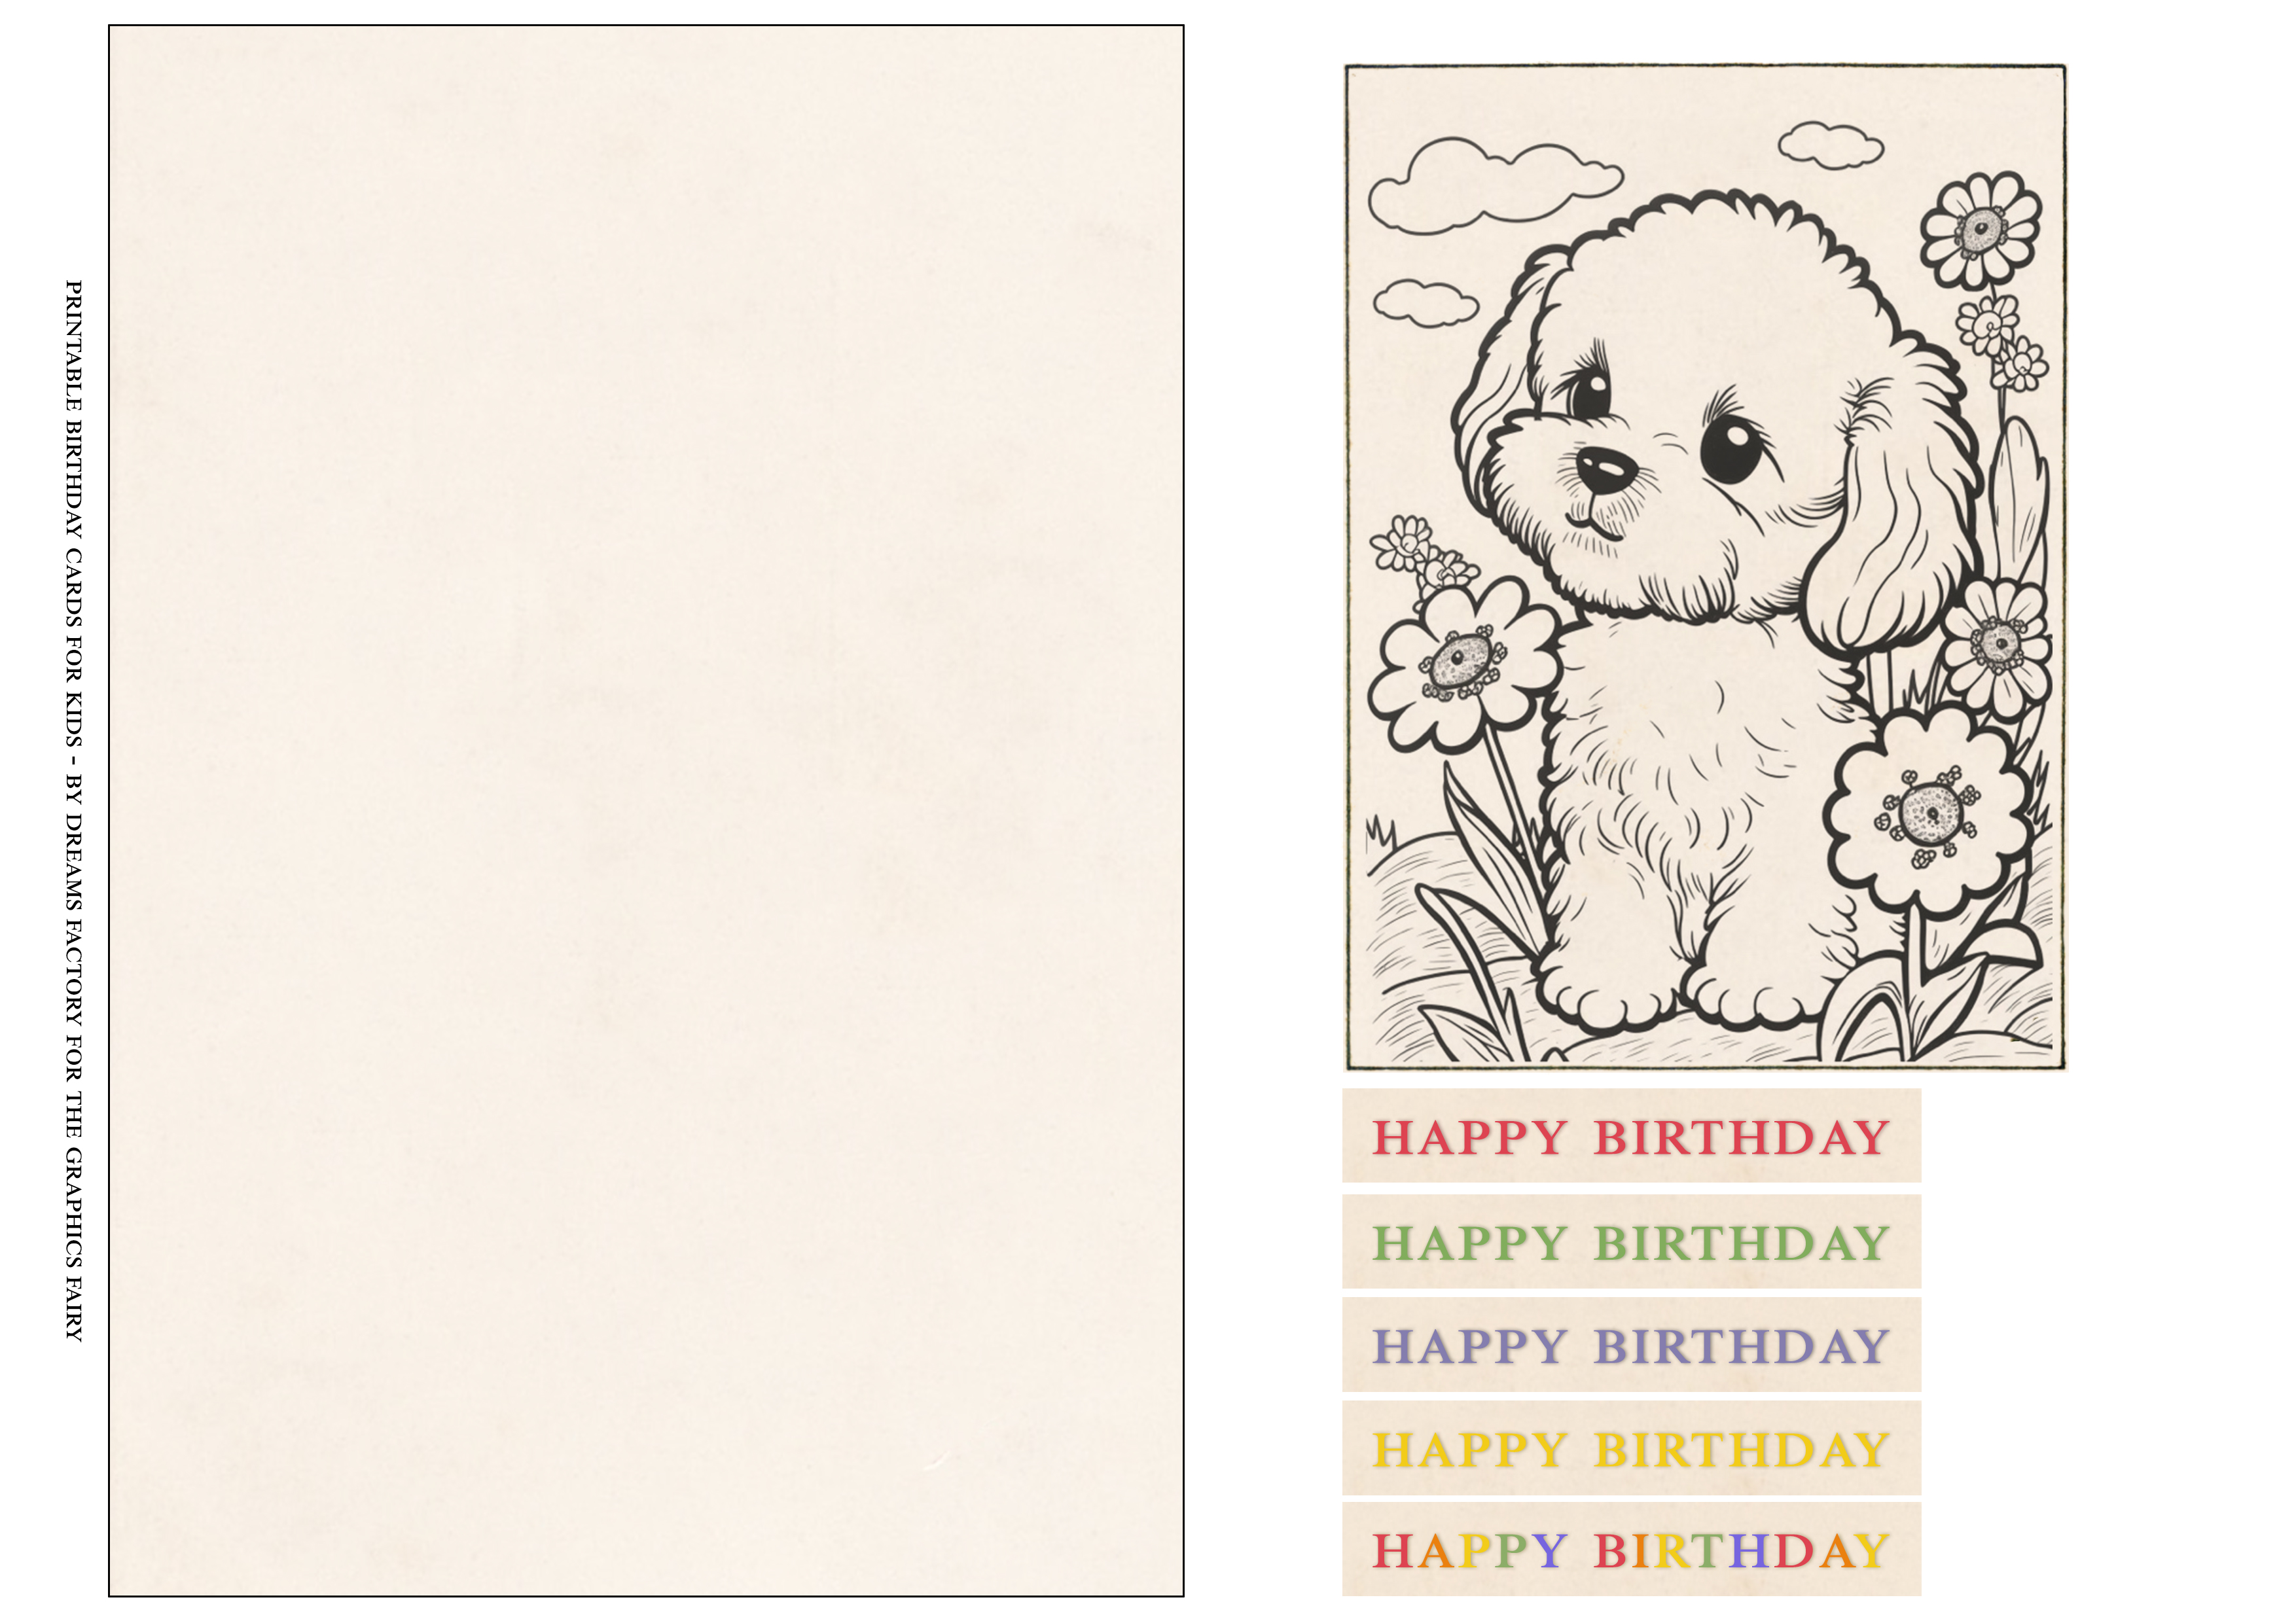 Printable birthday cards for kids - puppy printable